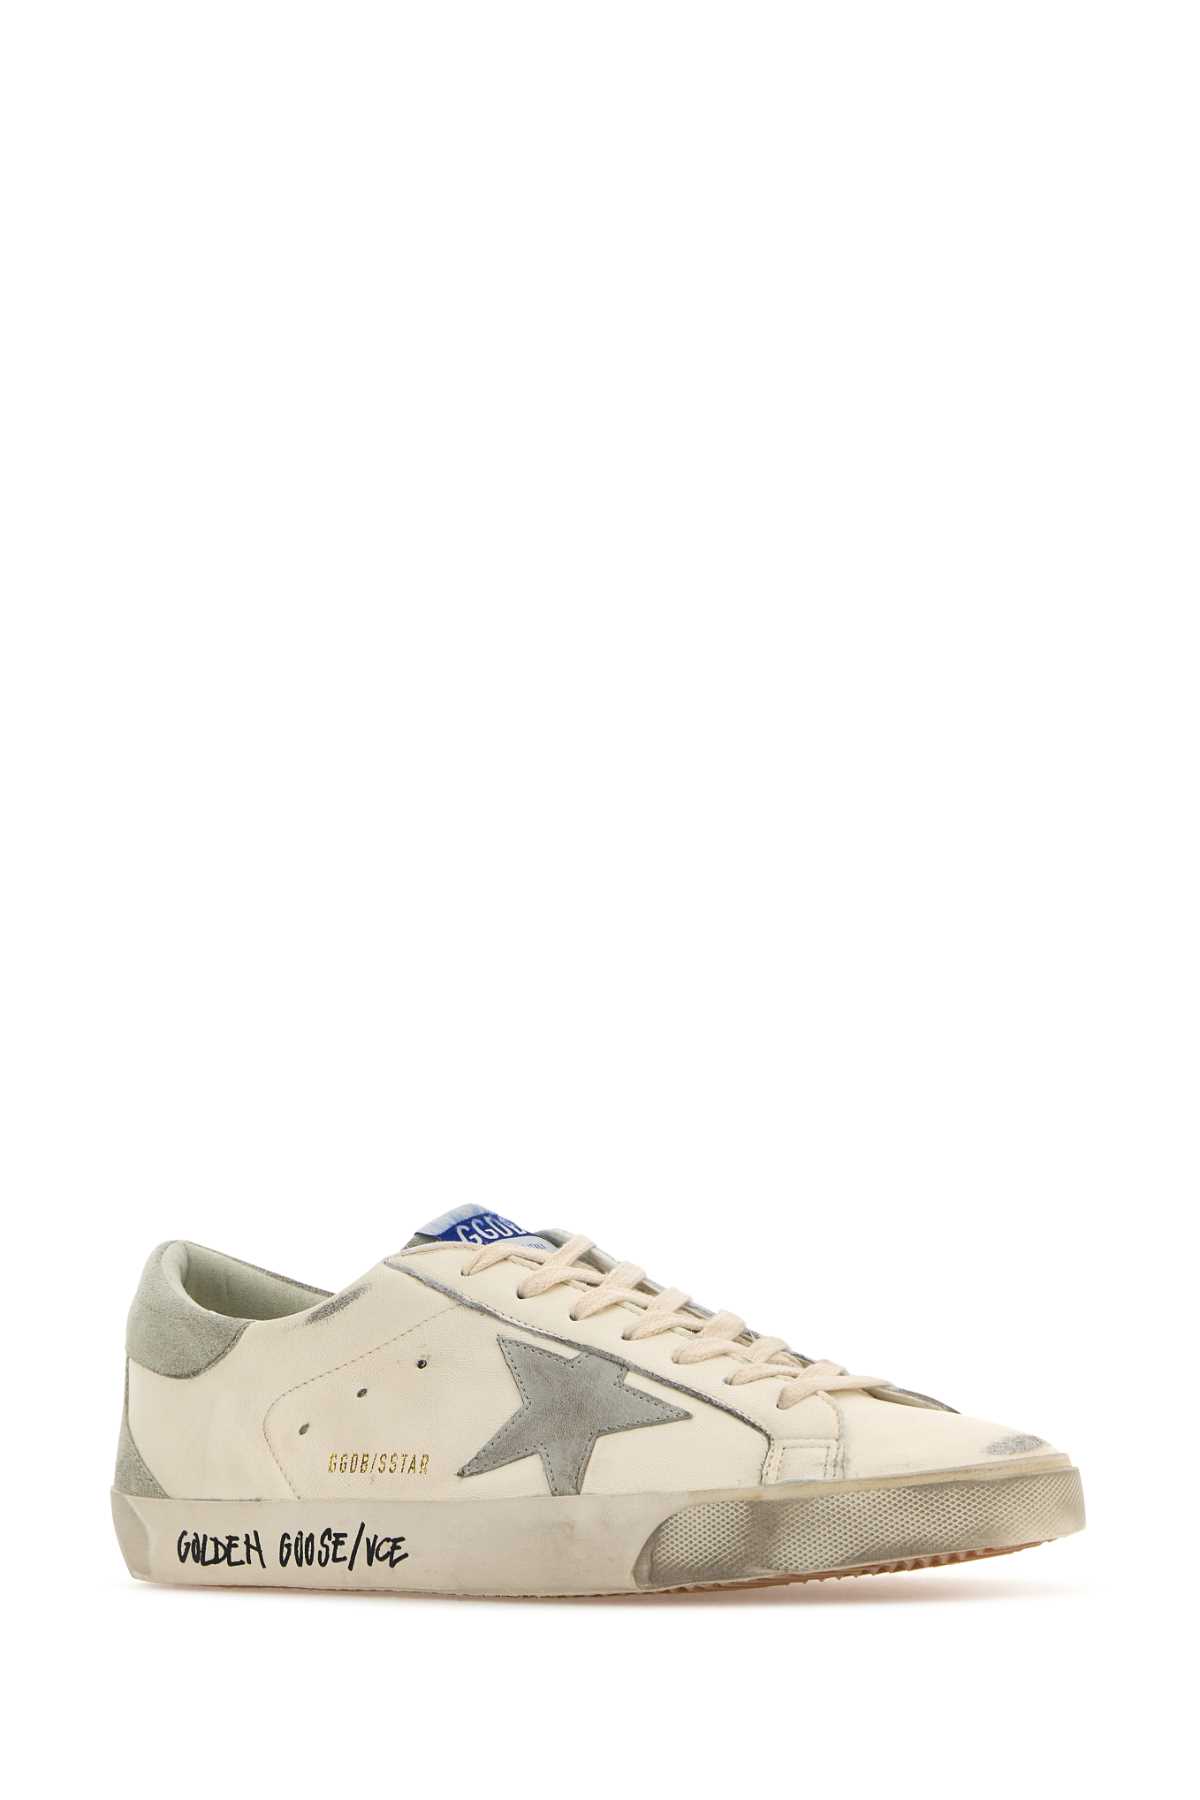 Shop Golden Goose Multicolor Leather Super Star Sneakers In Whiteicegrey